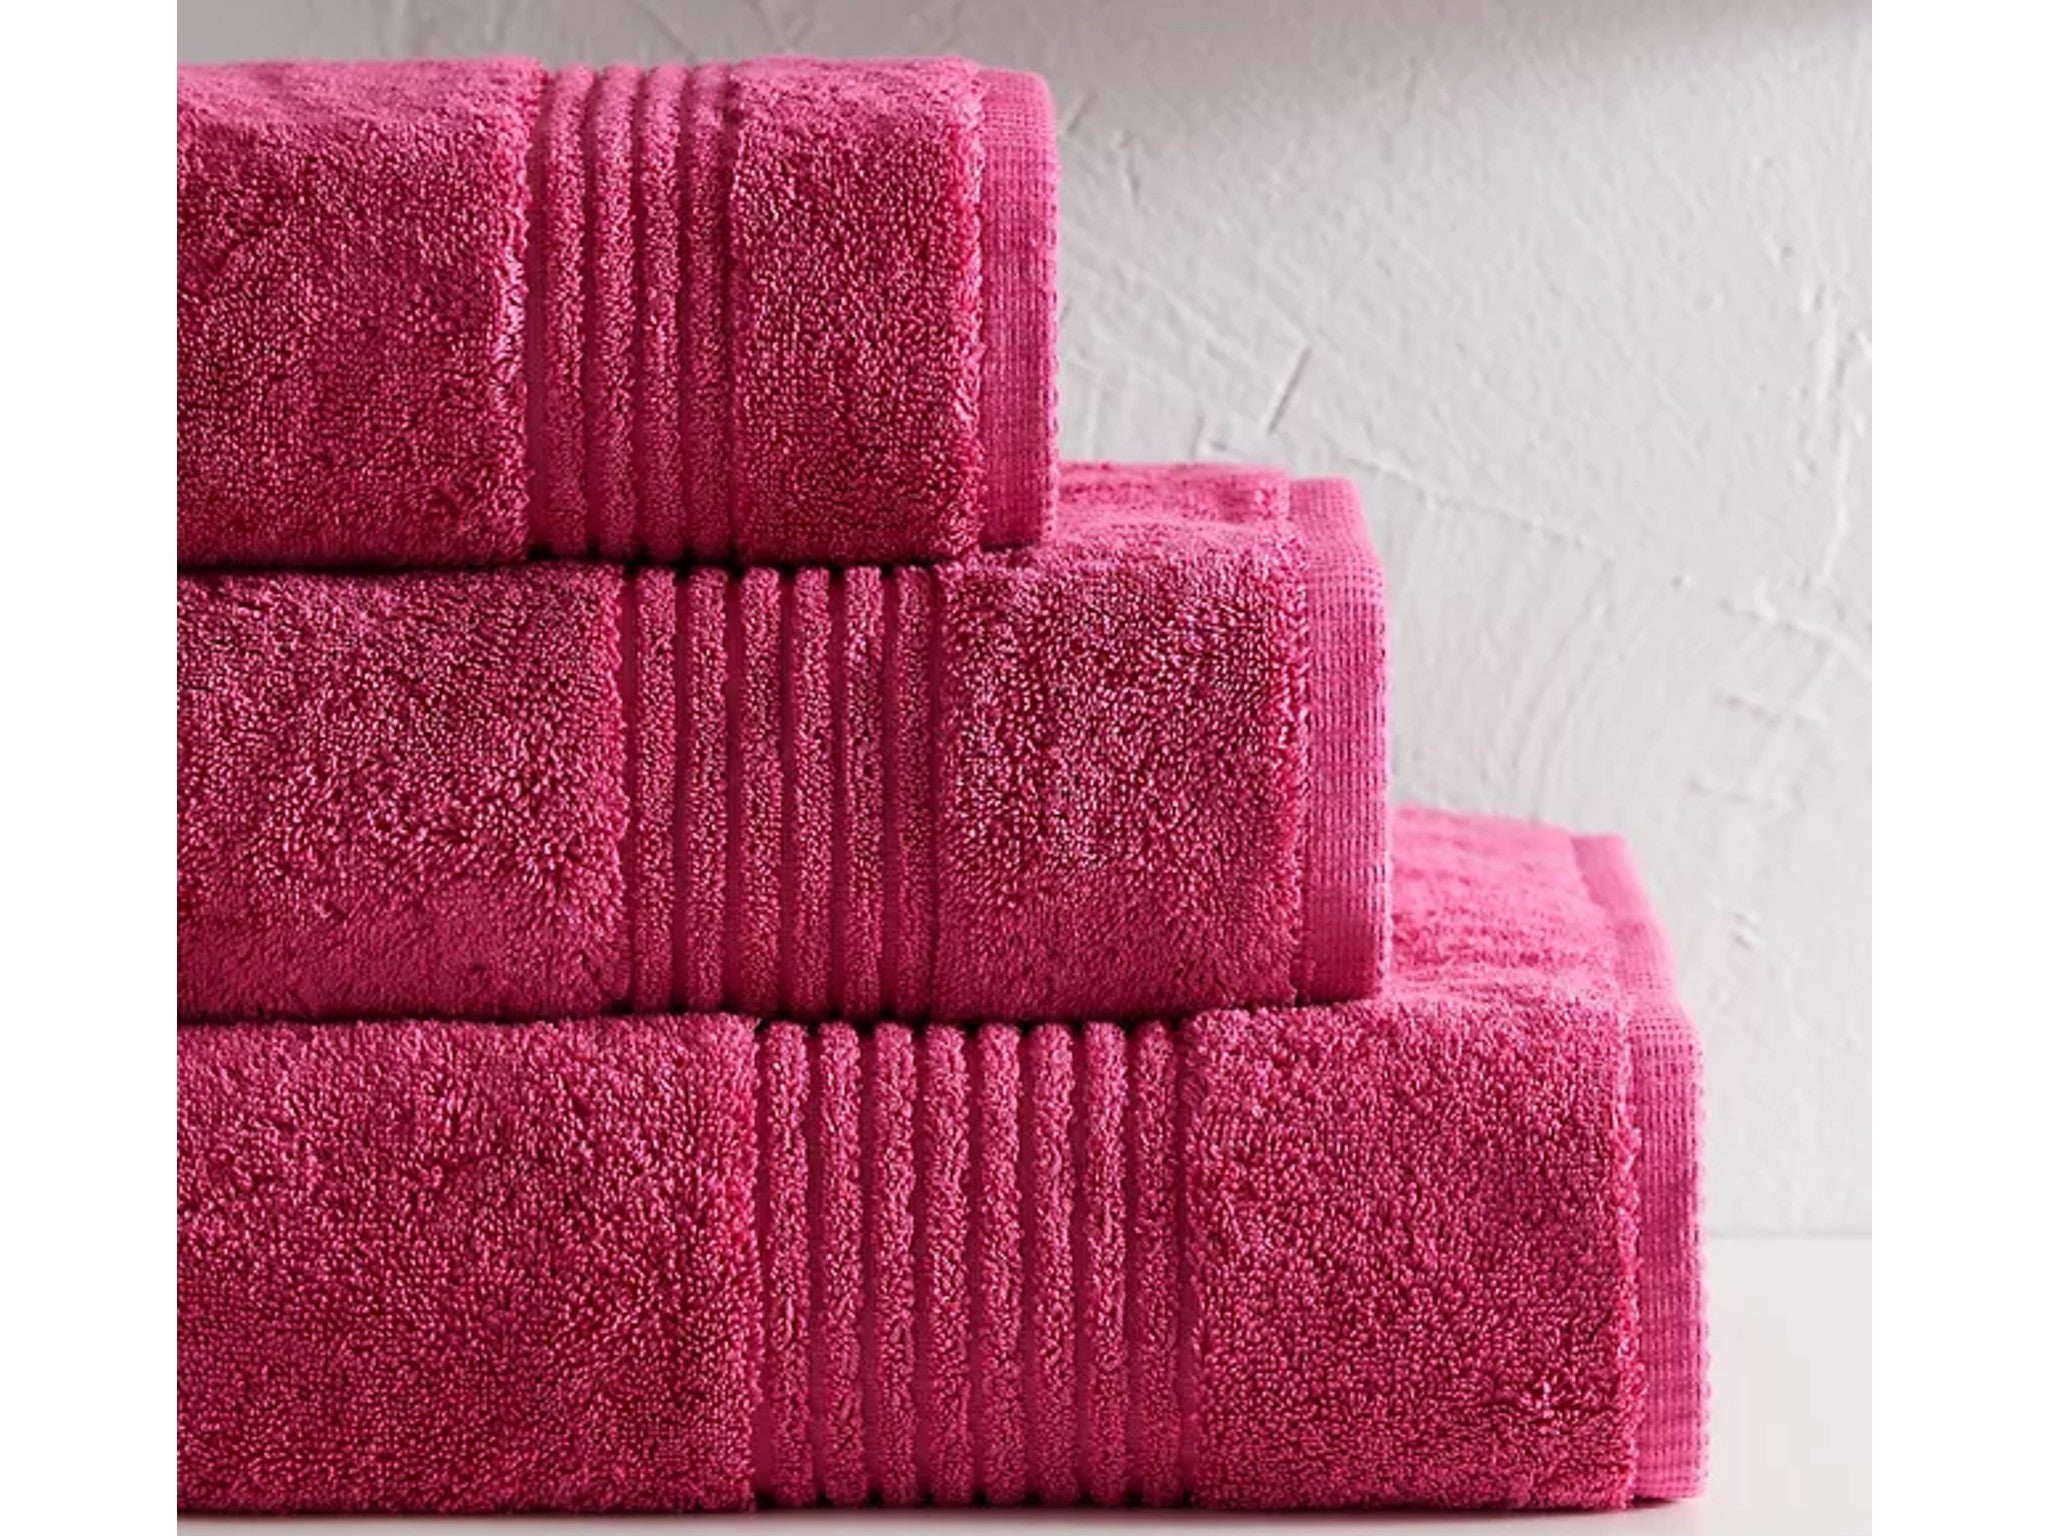 M&S Egyptian cotton towels